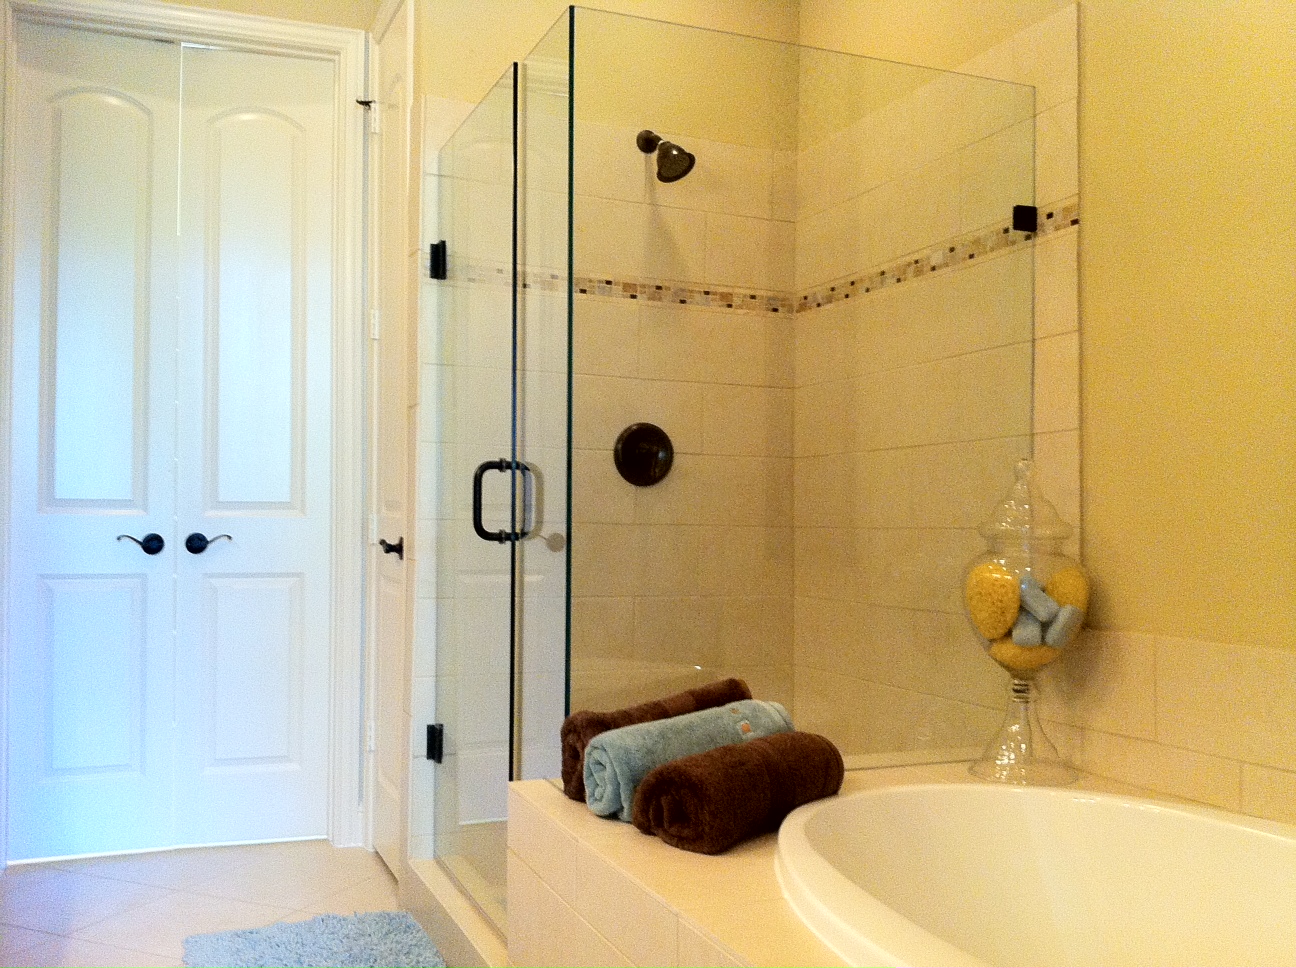 Please Replace My Glass Shower Door…. How Does Free Sound? | Alamo ...